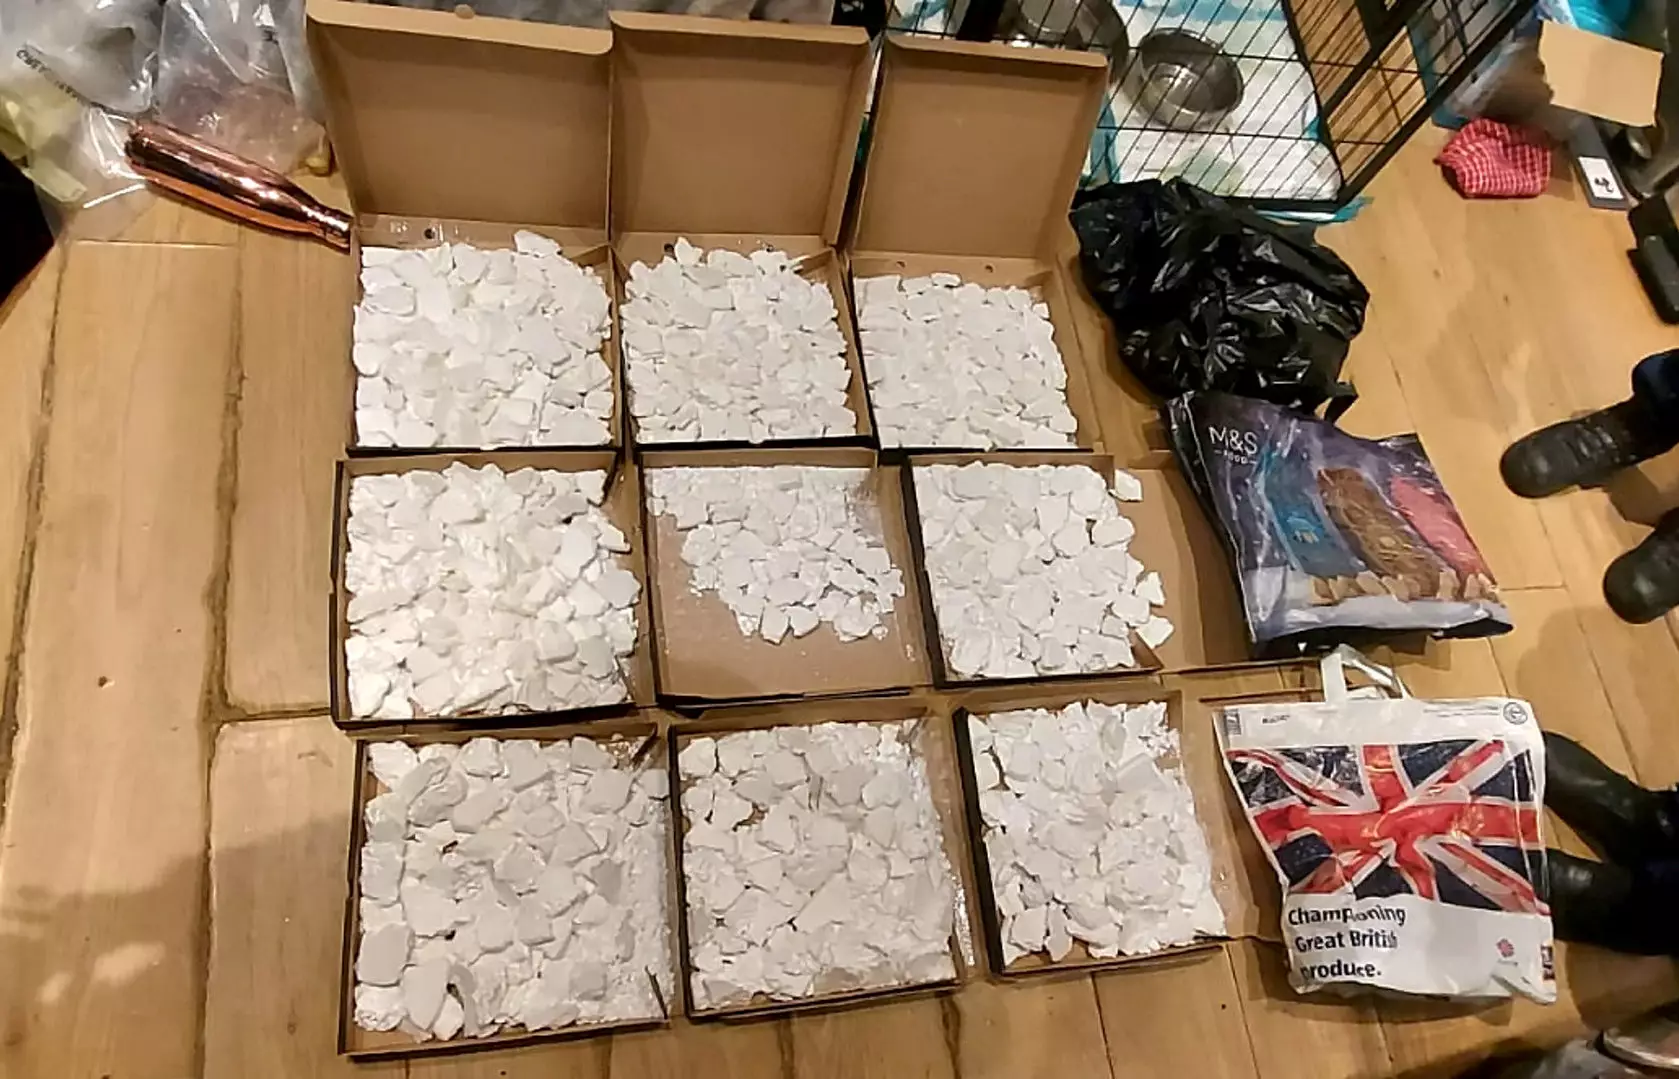 Police seized nine pizza boxed filled with what appears to be cocaine.